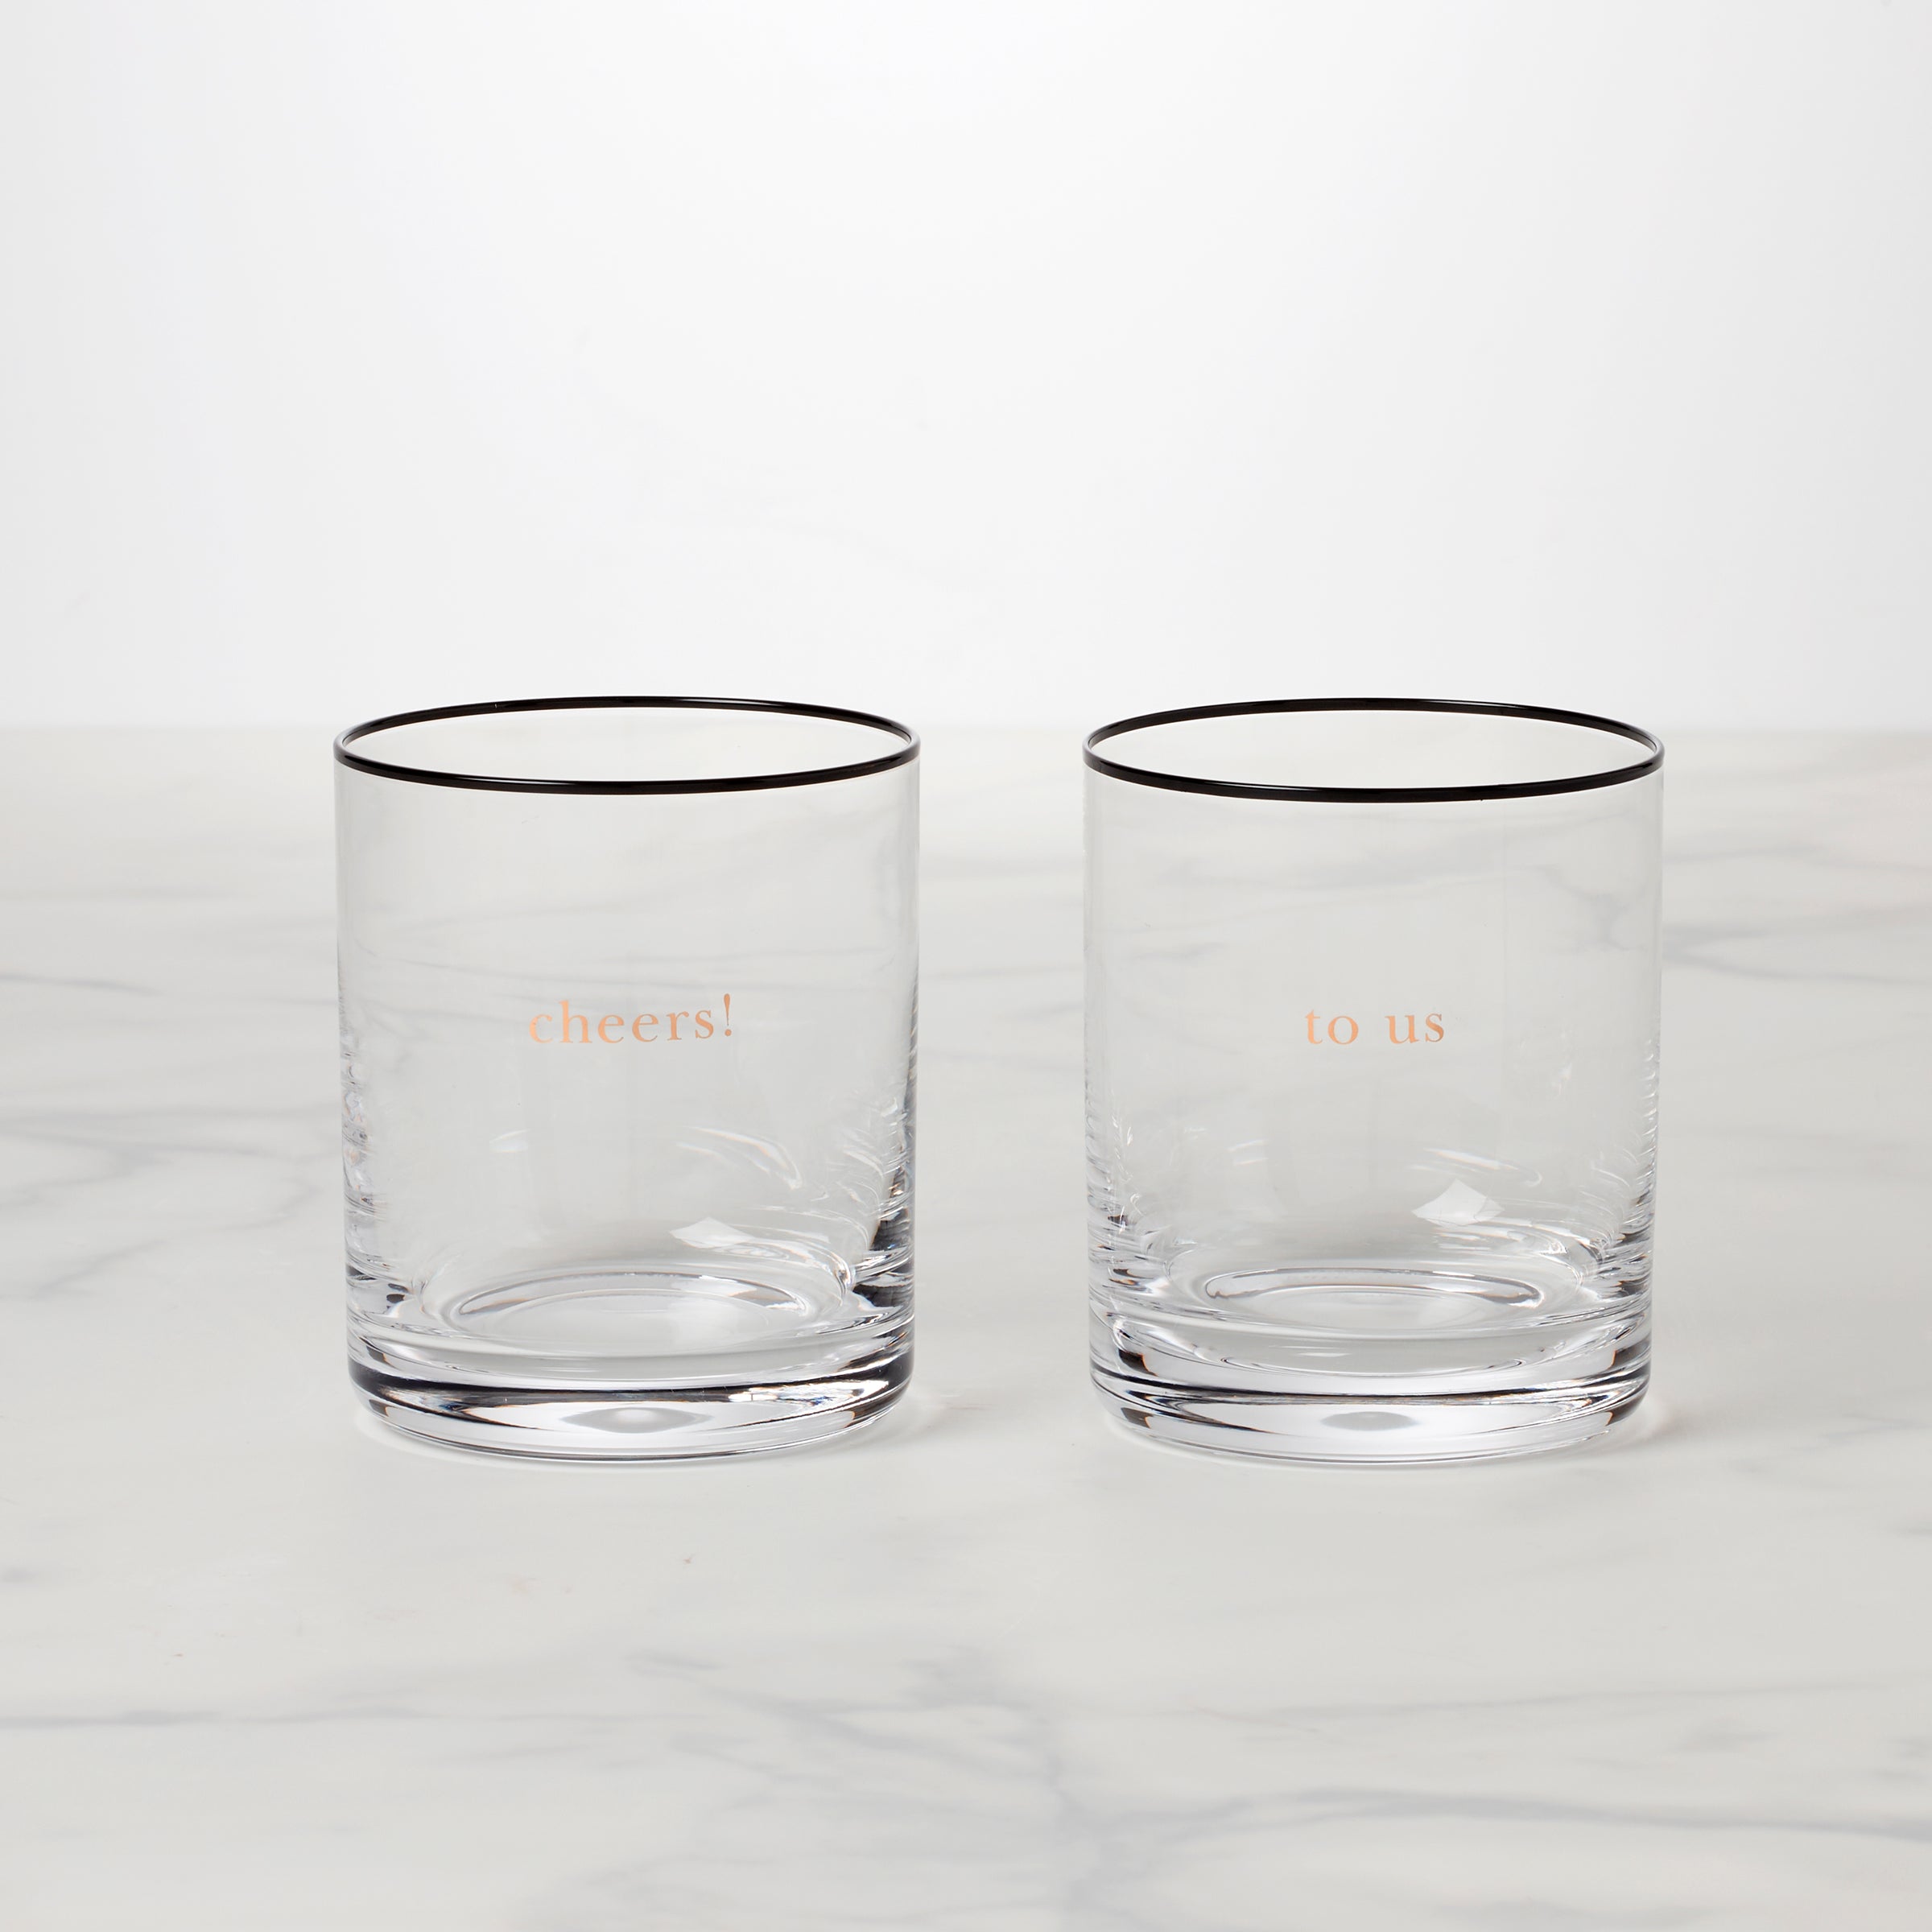 Cheers® Set of 4 Seltzer Glasses